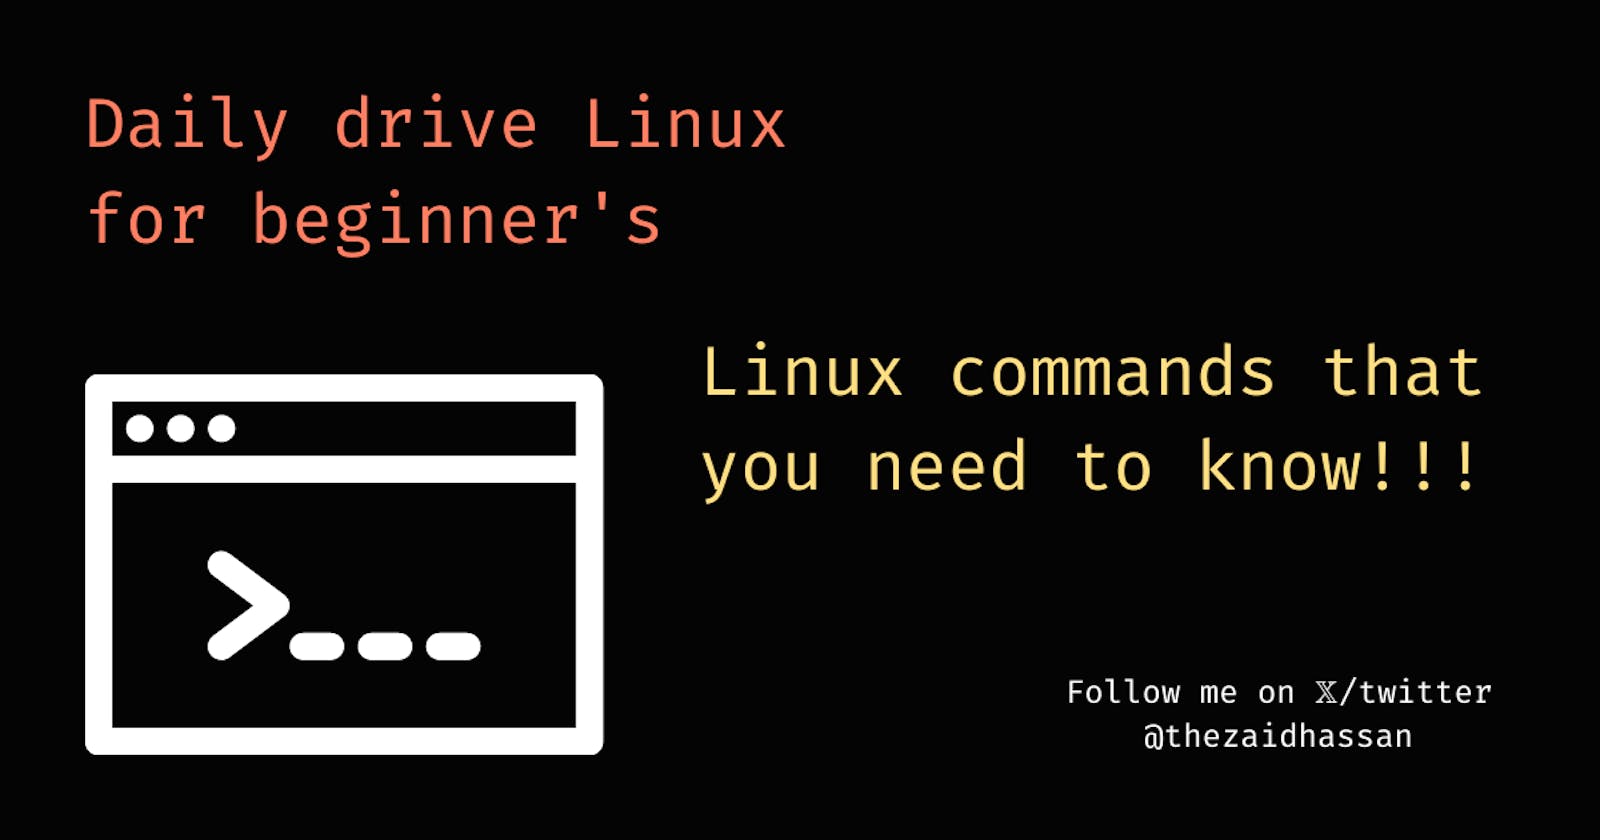 Basic Linux/Unix commands that you need to know